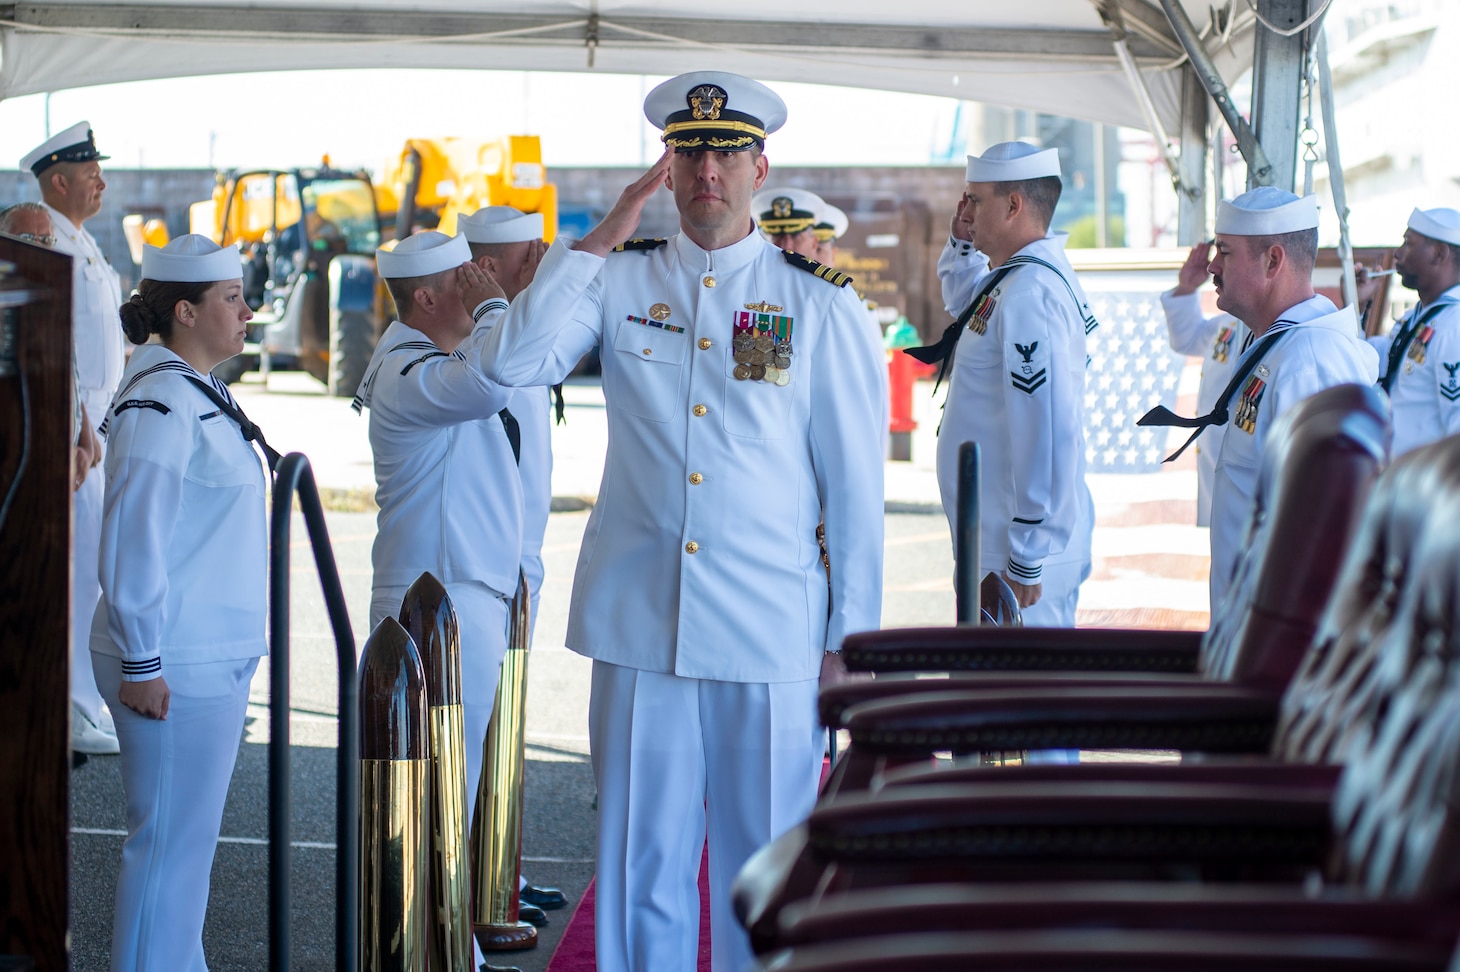 220923-N-NU634-013



NORFOLK (Oct. 23, 2022) – Cmdr. Thad D. Tasso, commanding officer USS Hué City (CG 66), salutes as he arrives for the decommissioning ceremony of the Ticonderoga-class guided- missile cruiser USS Hué City (CG 66) after 31 years of naval service. Following decommissioning, the ship is slated to be towed to the Navy’s Inactive Ship’s facility in Philadelphia, Pa., where it

will be in a Logistical Support Asset status. (U.S. Navy photo by Mass Communications Specialist 2nd Class Darien G. Kenney)